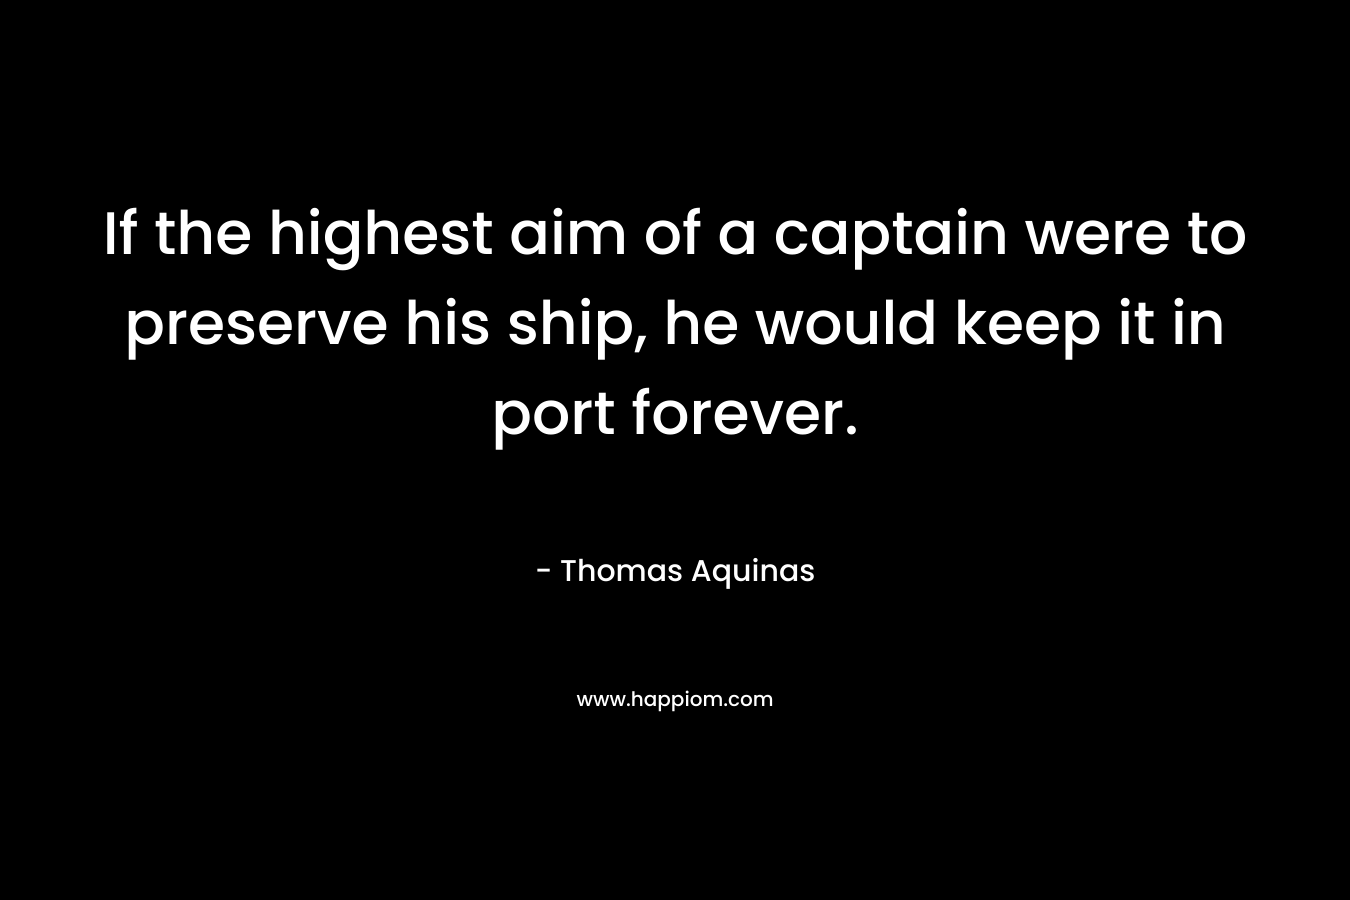 If the highest aim of a captain were to preserve his ship, he would keep it in port forever.